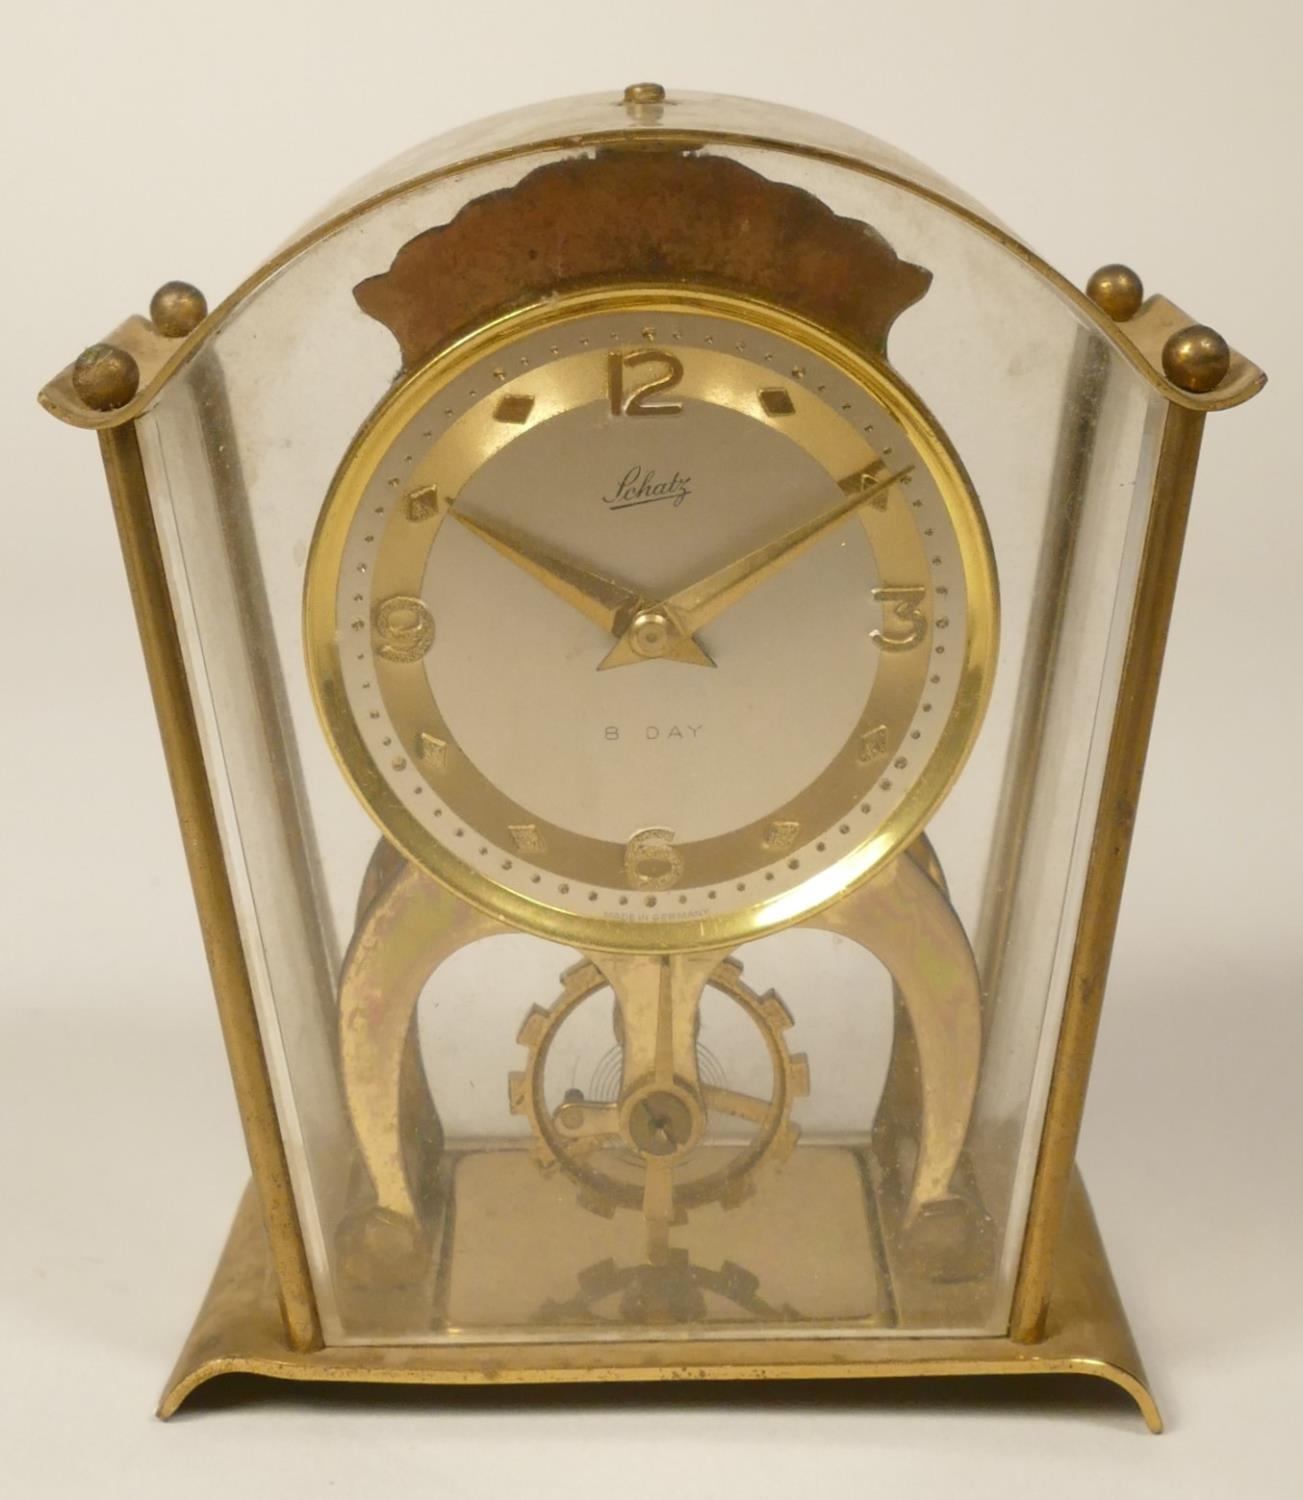 A Schatz 8 day, brass carriage time piece with visible escapement, together with another similar - Image 2 of 9